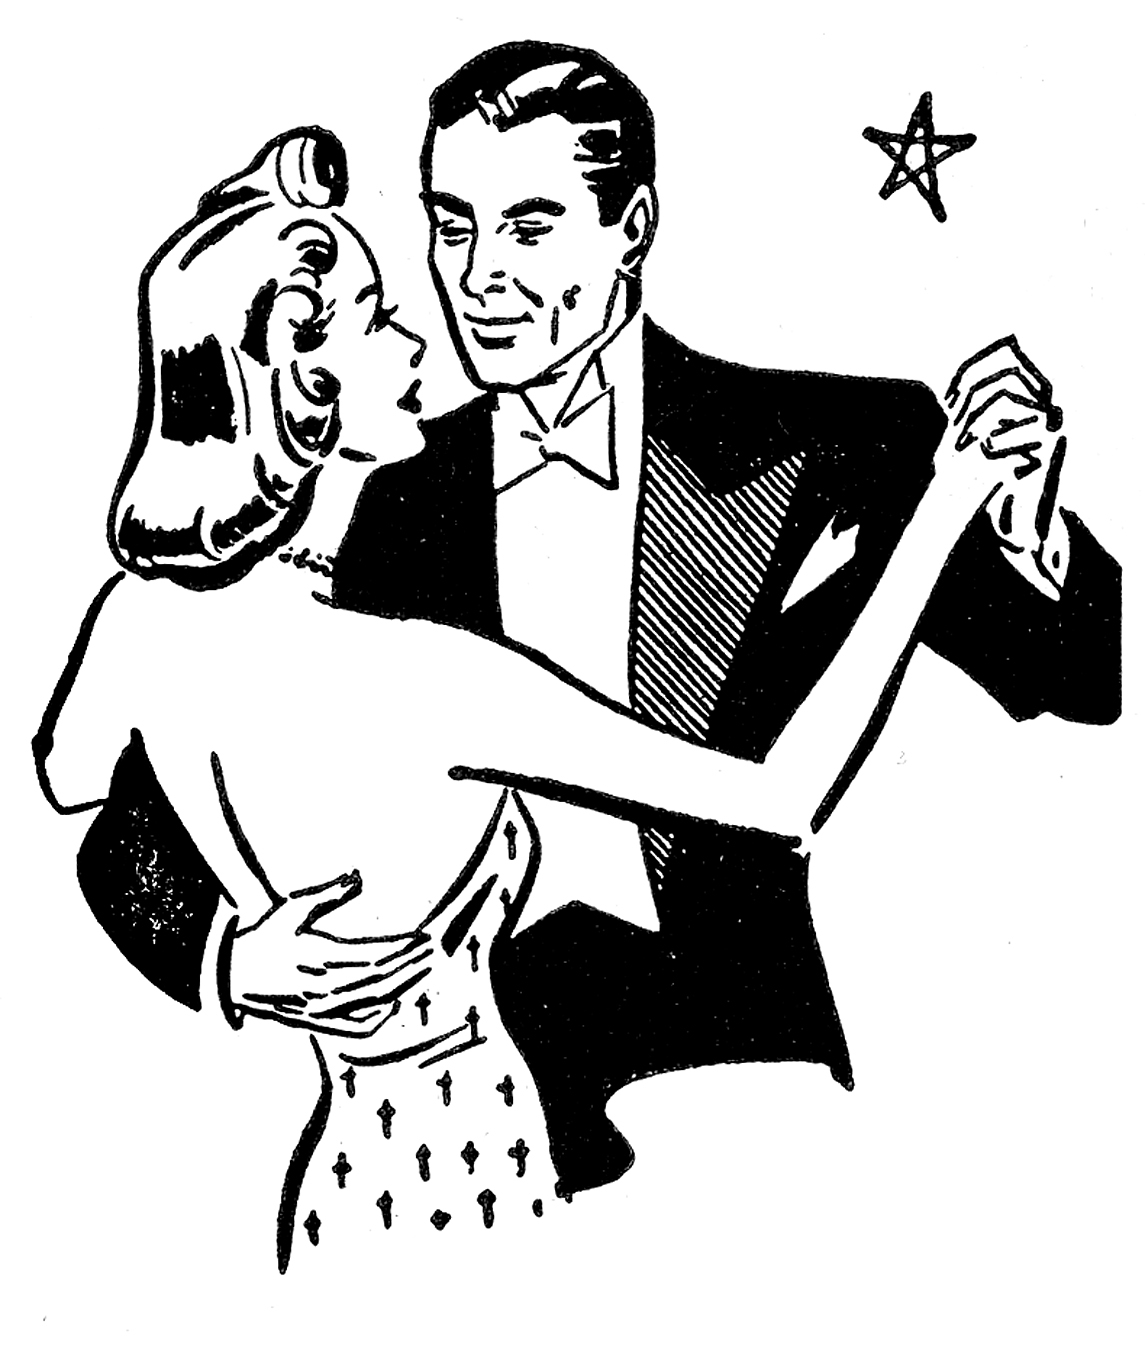 Man and woman dancing close] - Drawing. Public domain image. - PICRYL -  Public Domain Media Search Engine Public Domain Image